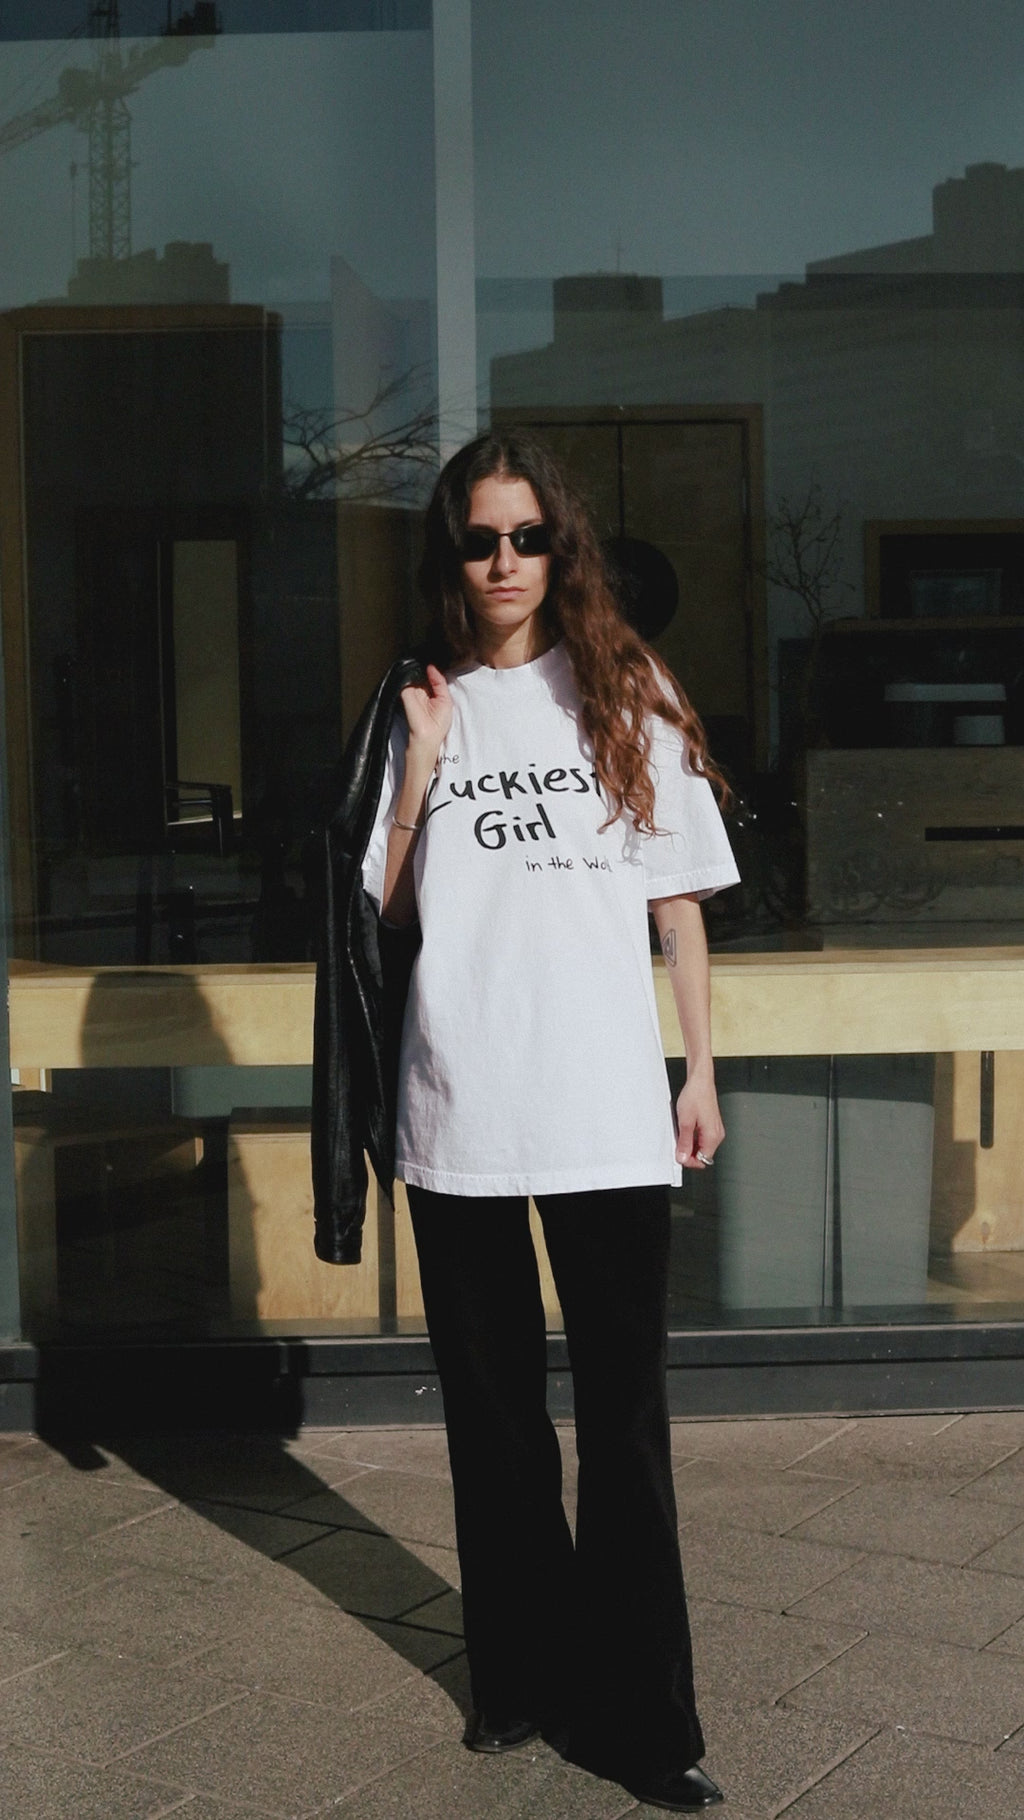 DABUSH LUCKY GIRL T-SHIRT. 100% Cotton, oversized tee with Back and front print. Made in Tel aviv. Shop and view the latest Drops from the official DABUSH website. Worldwide Shipping. DABUSH is a publishing house, design studio and a brand based in Tel Aviv, Israel. Lucky Girl Syndrome T-SHIRT.